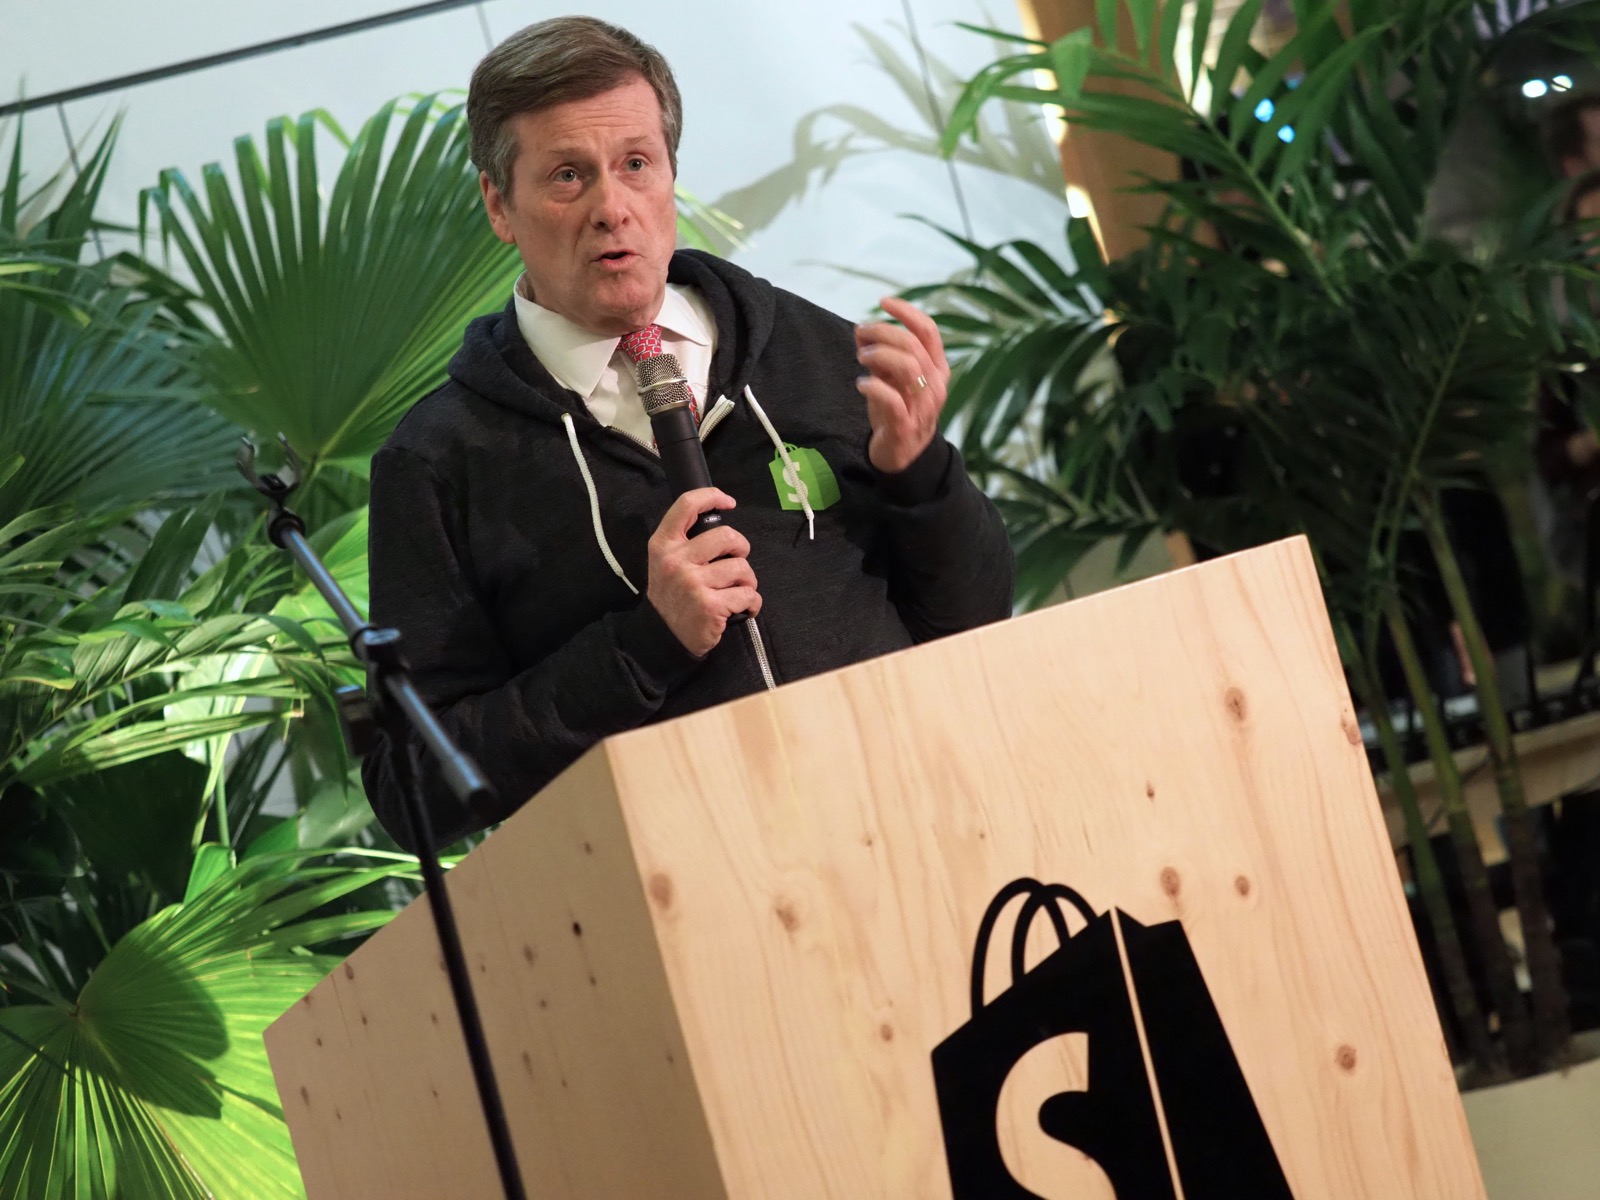 Toronto Mayor John Tory at Shopify's new expansion office opening.